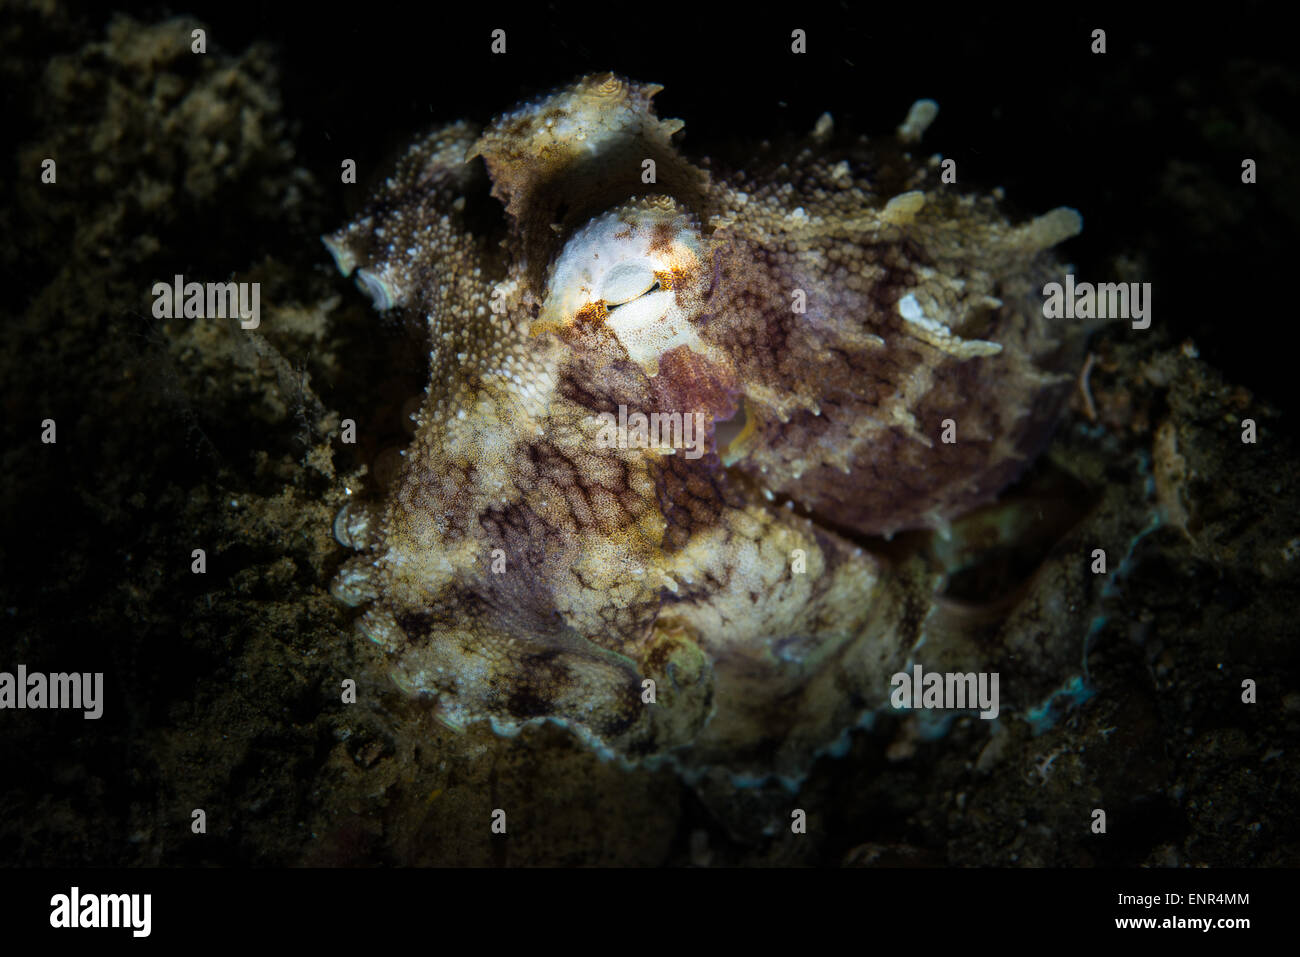 A coconut octopus during a night dive in Ambon Stock Photo